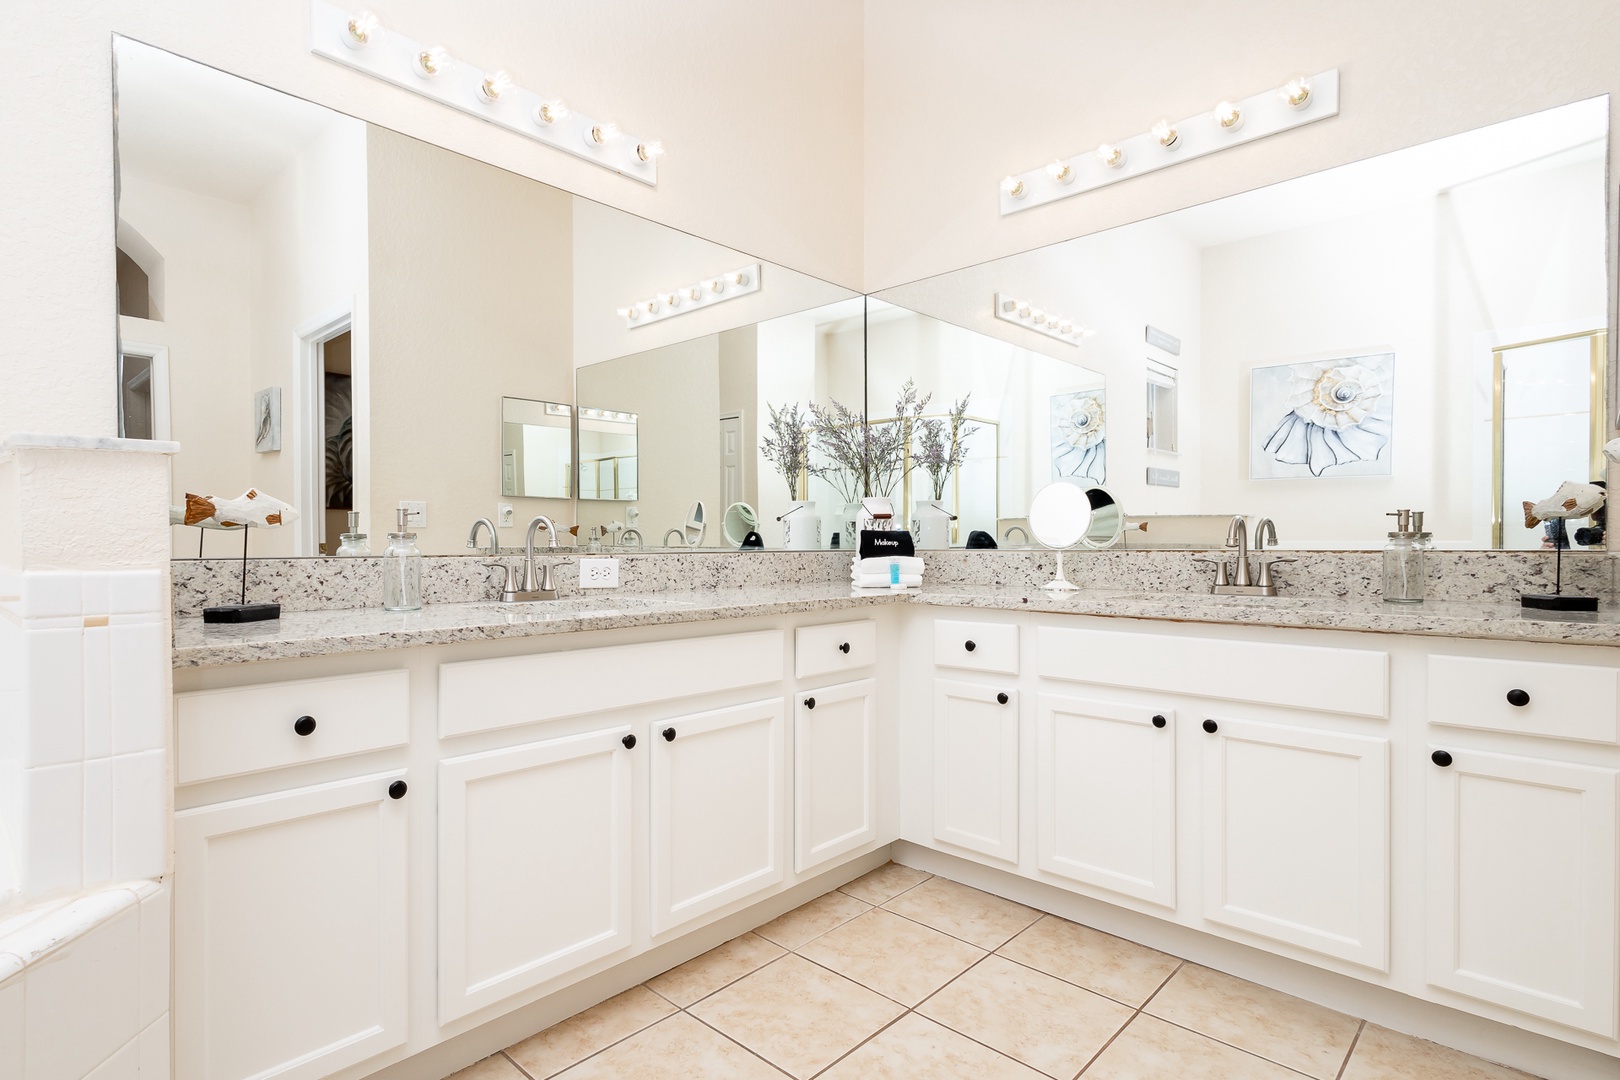 The king ensuite features dual vanities, a glass shower, & luxurious soaking tub